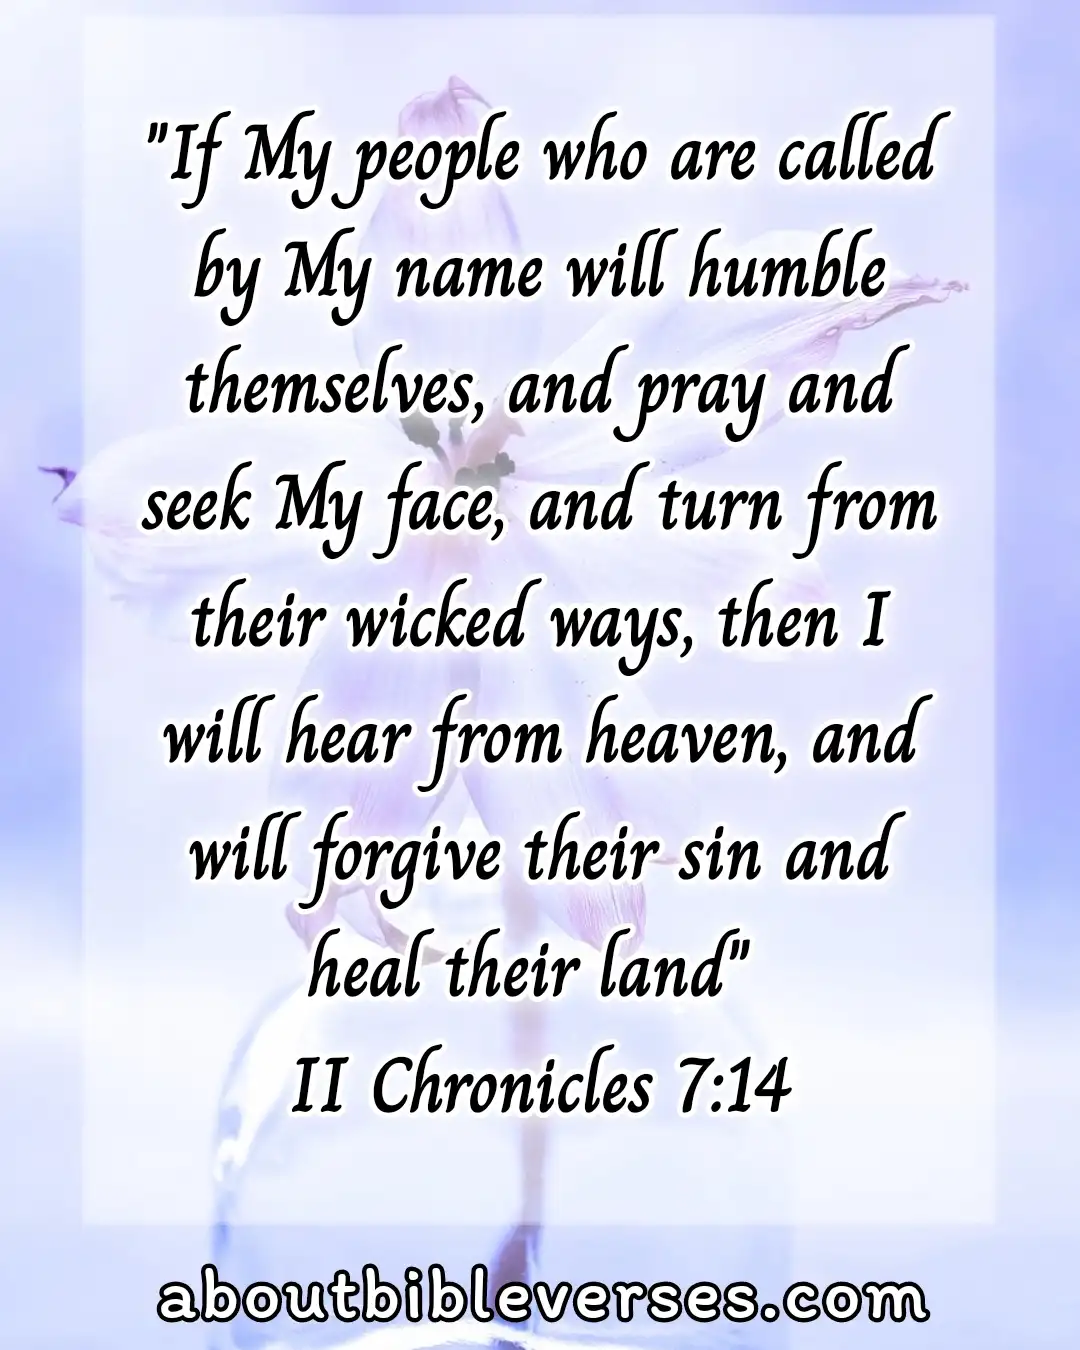 today bible verse (2 Chronicles 7:14)